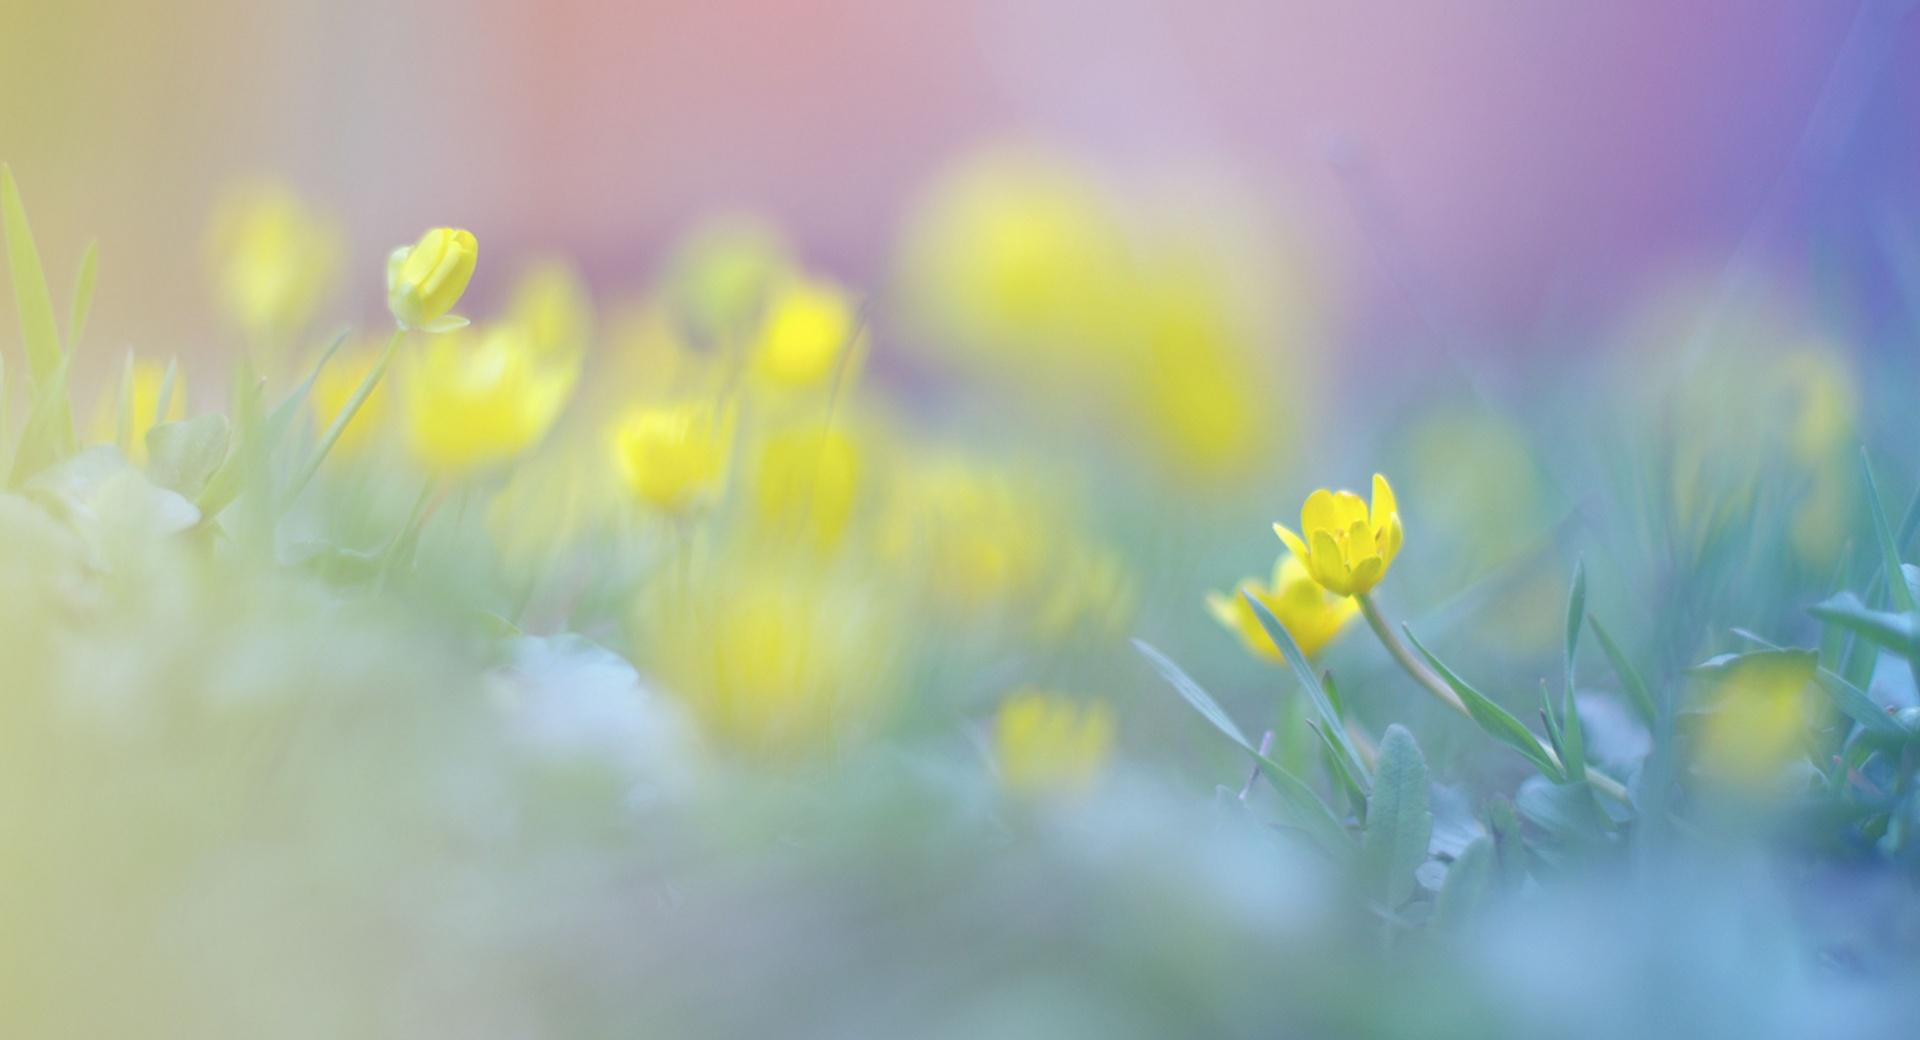 Blurred Flowers Image wallpapers HD quality